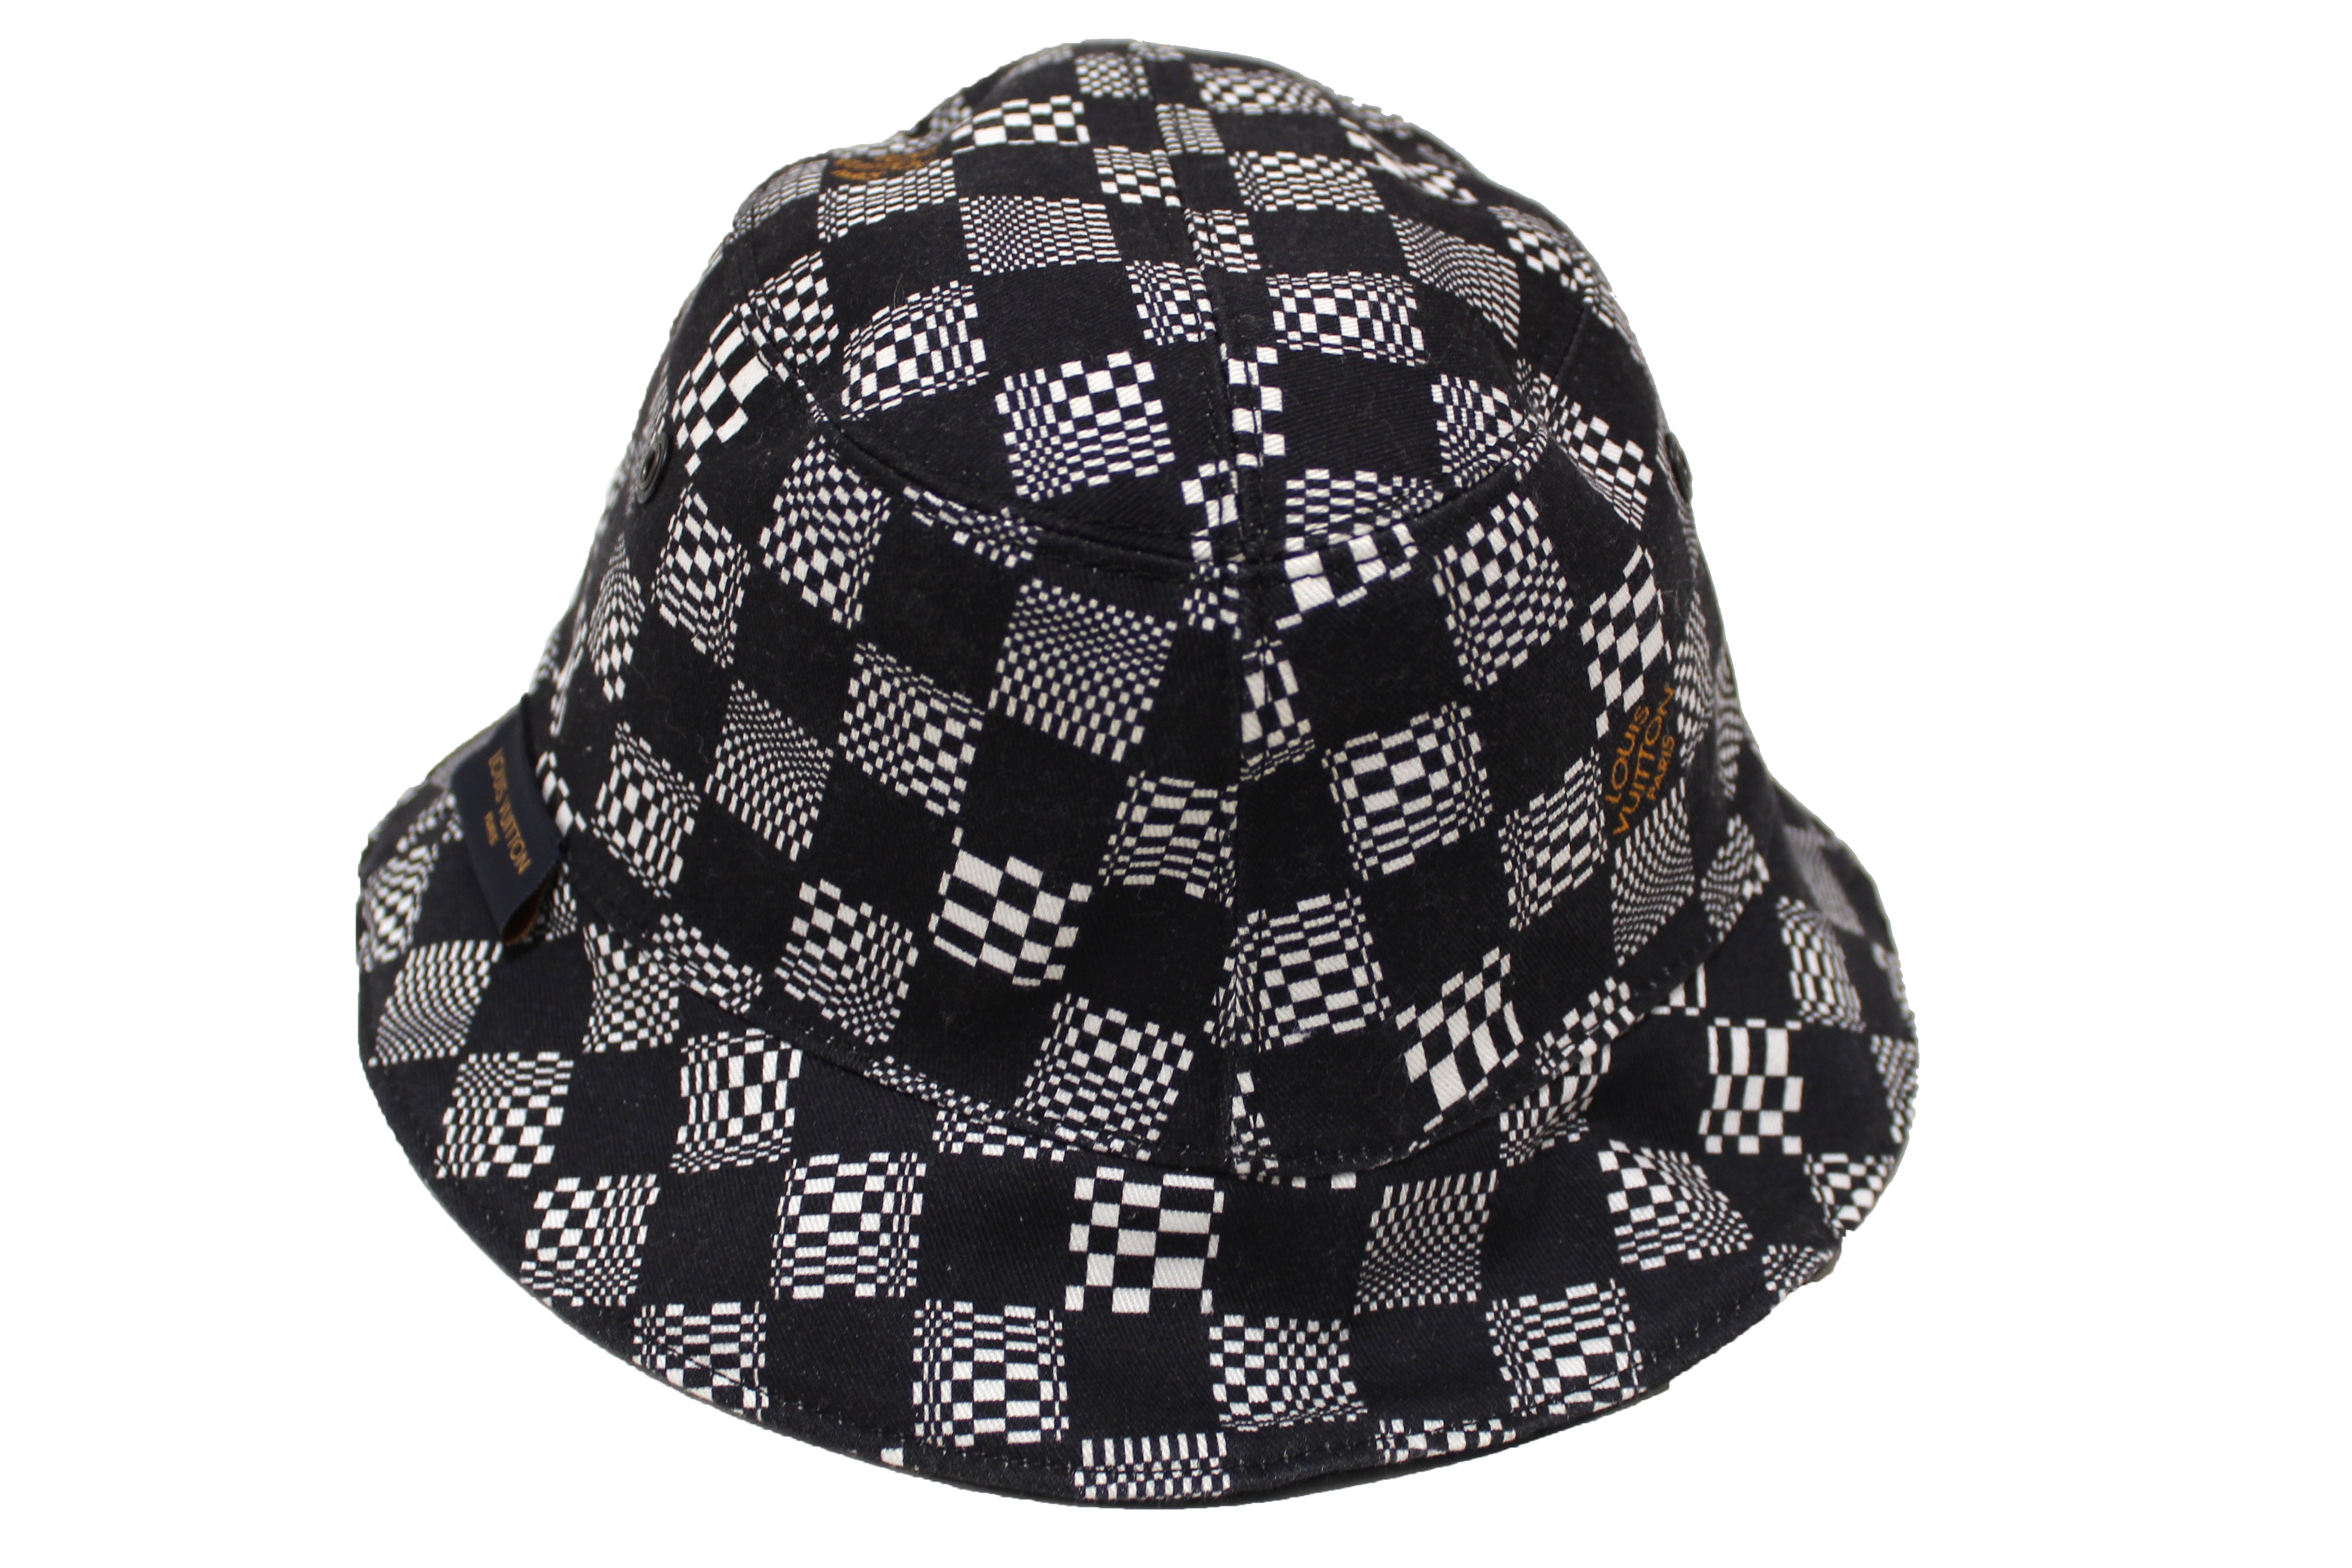 Yarahatdo - Double sided Louis Vuitton Bucket hat Status: Available Price:  Ksh.1,100 Colours: Black/red ,Black/Black